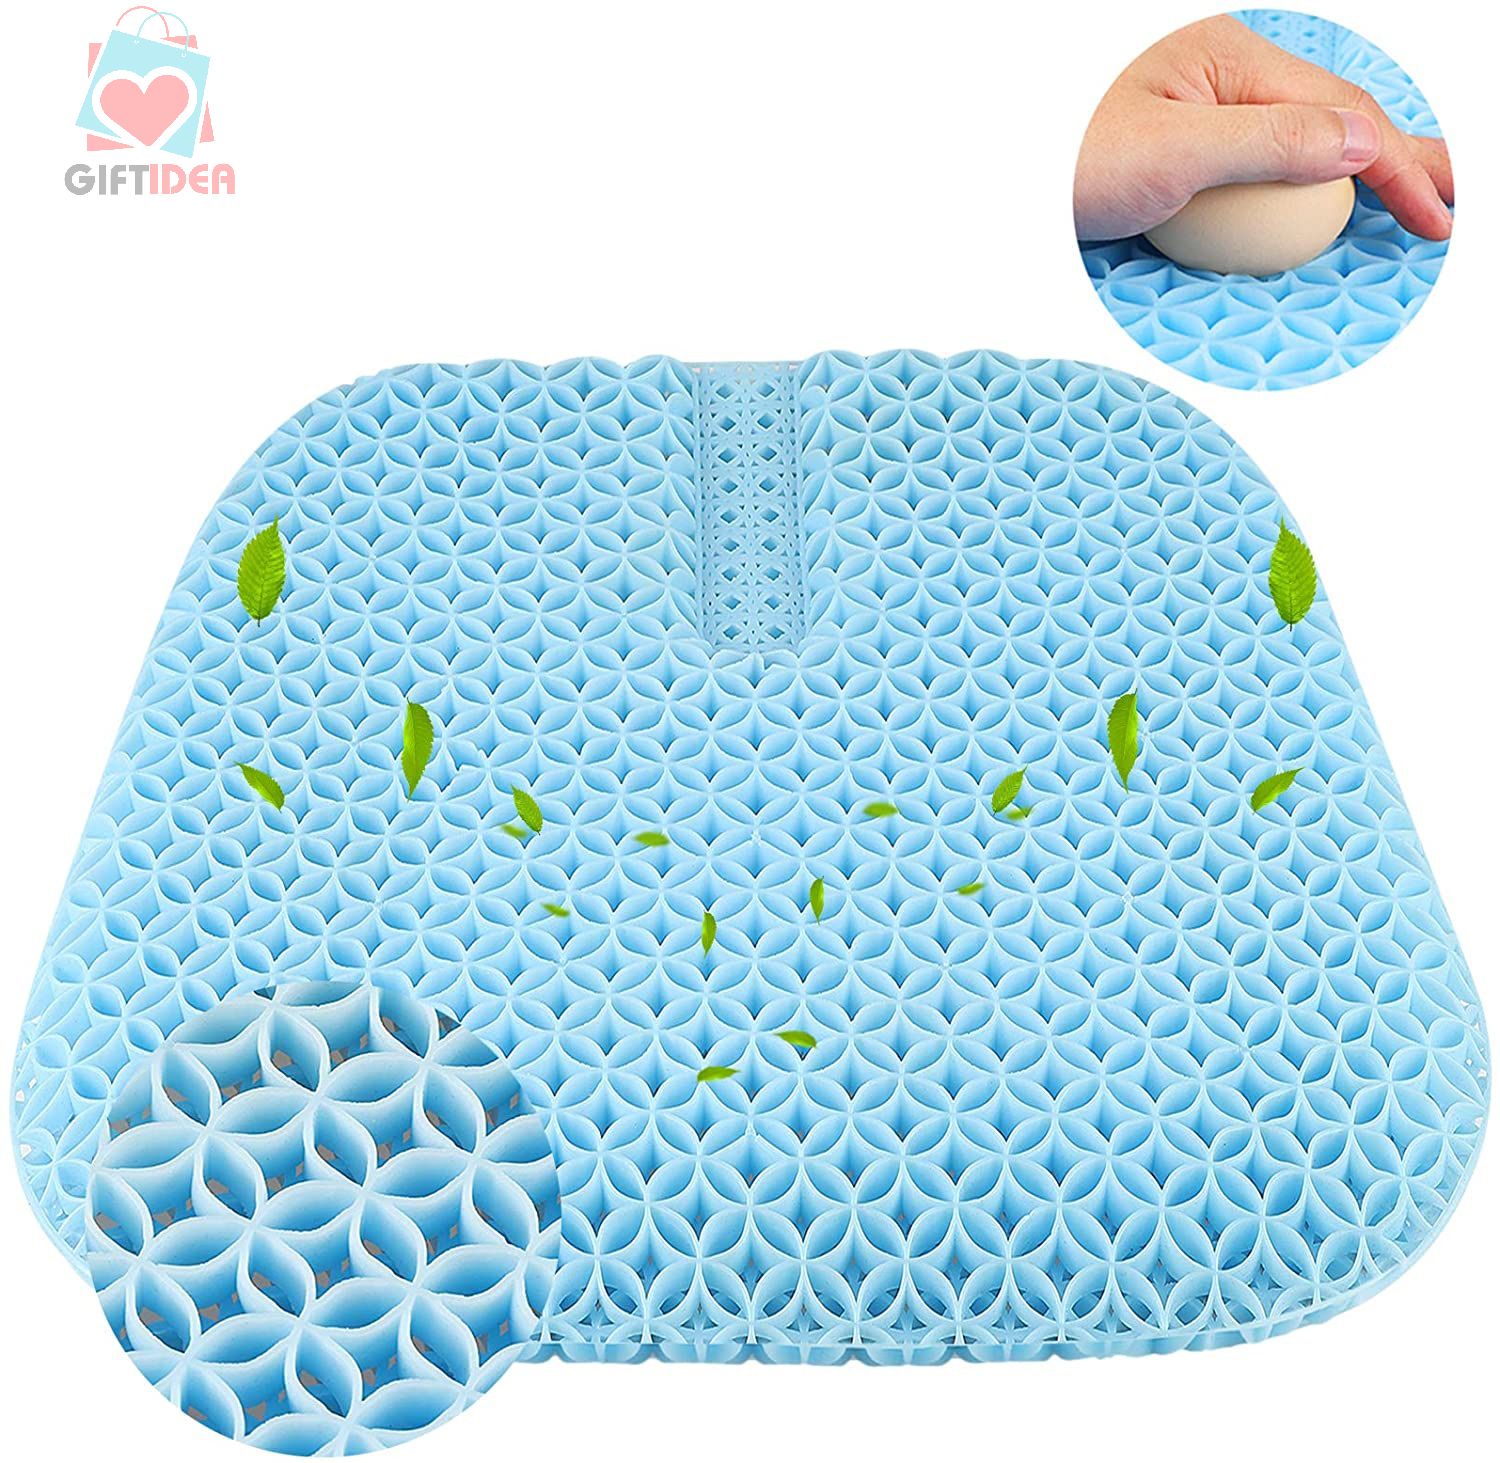 Azsure Large Enhanced Gel Seat Cushion for Office Chair Pad Wheelchair Cushion & Car Seat Egg Pressure Test Nonslip Cover Back Lumbar Support Tailbone Sciatica Pain Pressure Relief Pillow Pads 